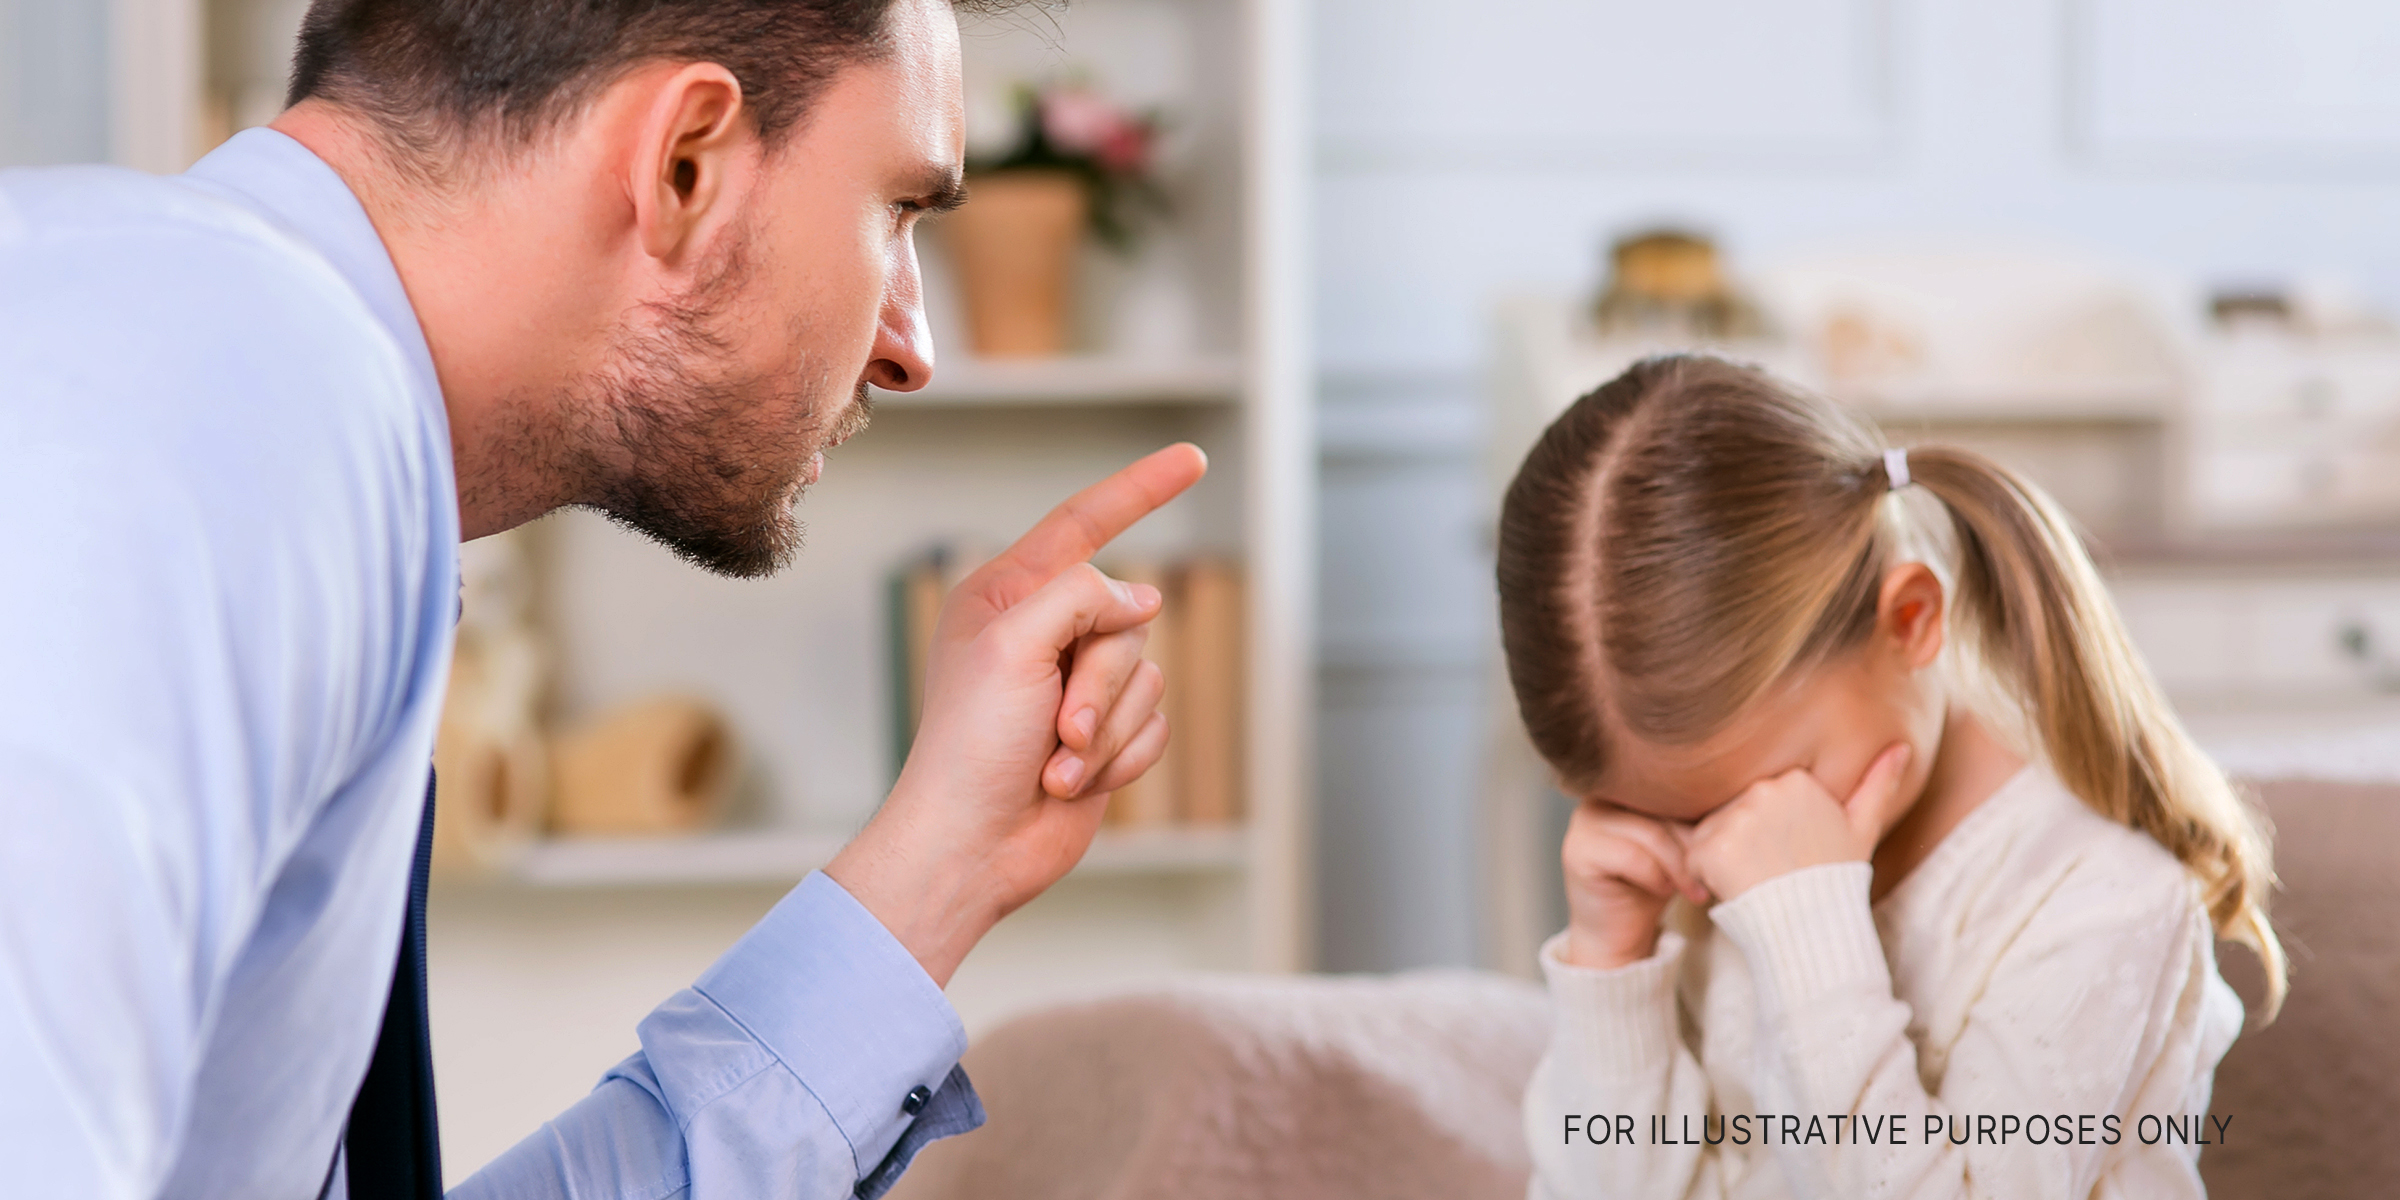 A father disciplining his daughter | Source: Shutterstock